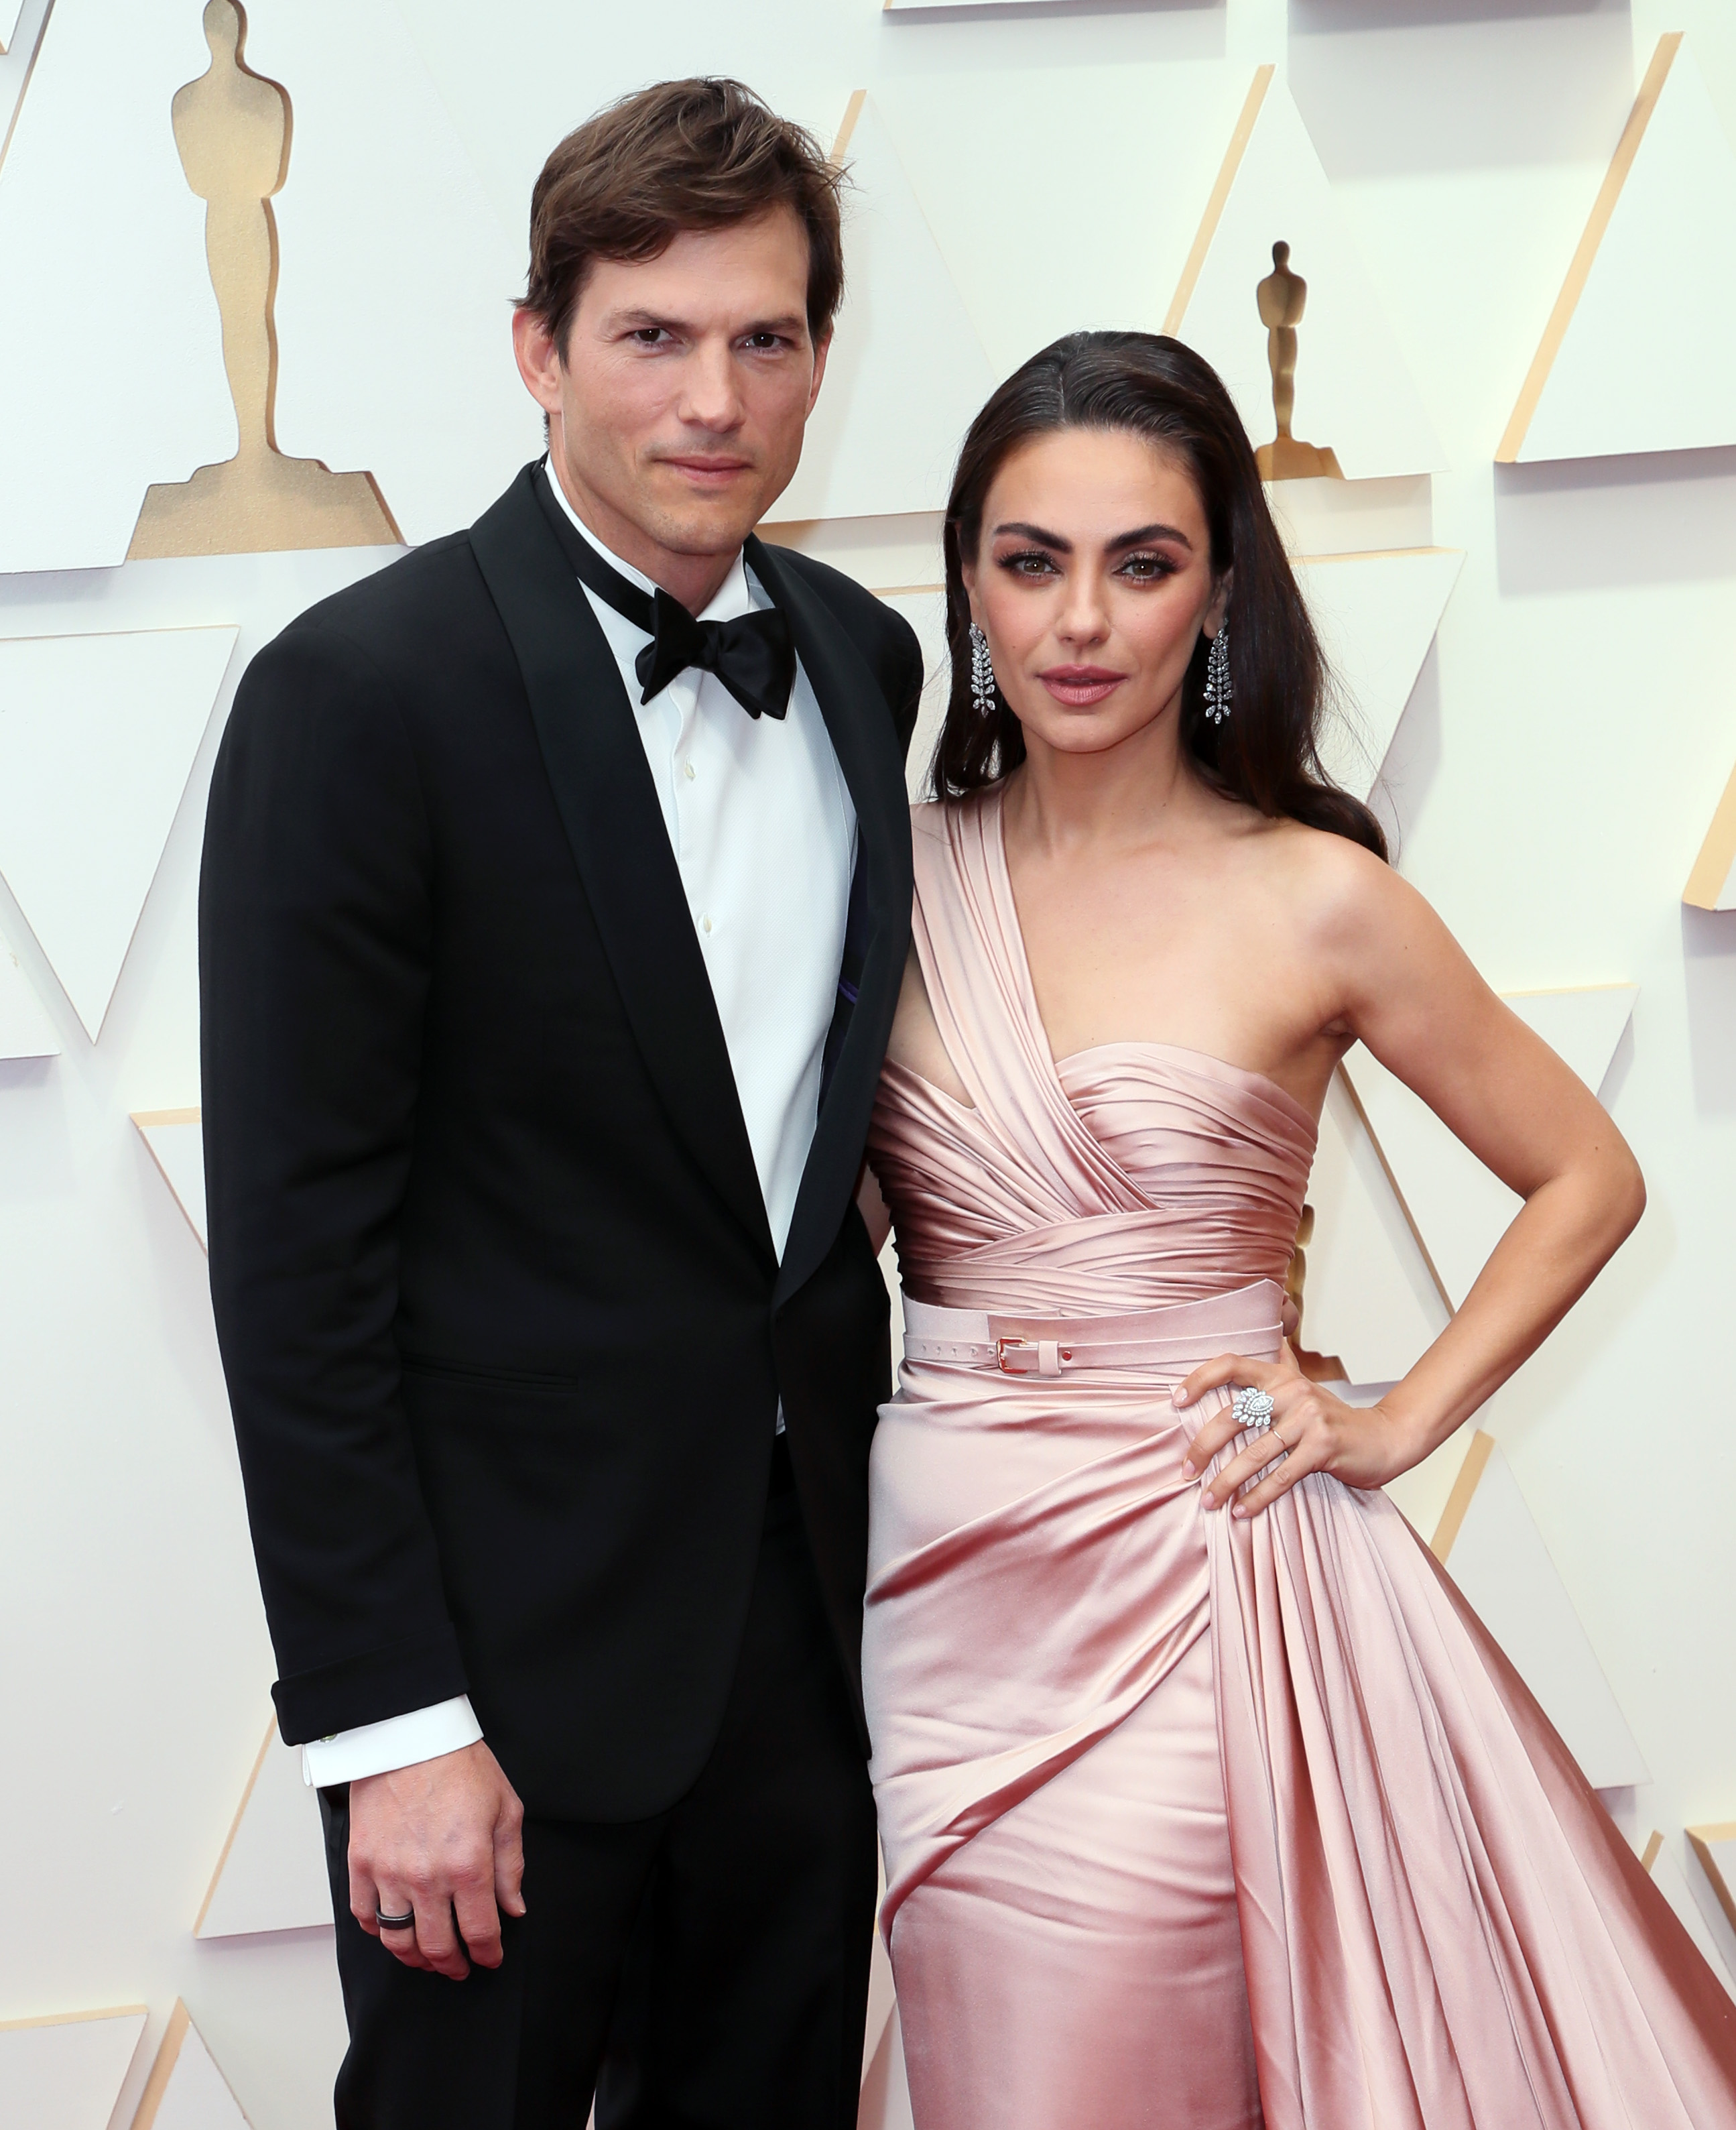 Ashton Kutcher and Mila Kunis at the 94th Annual Academy Awards in Hollywood, California on March 27, 2022 | Source: Getty Images